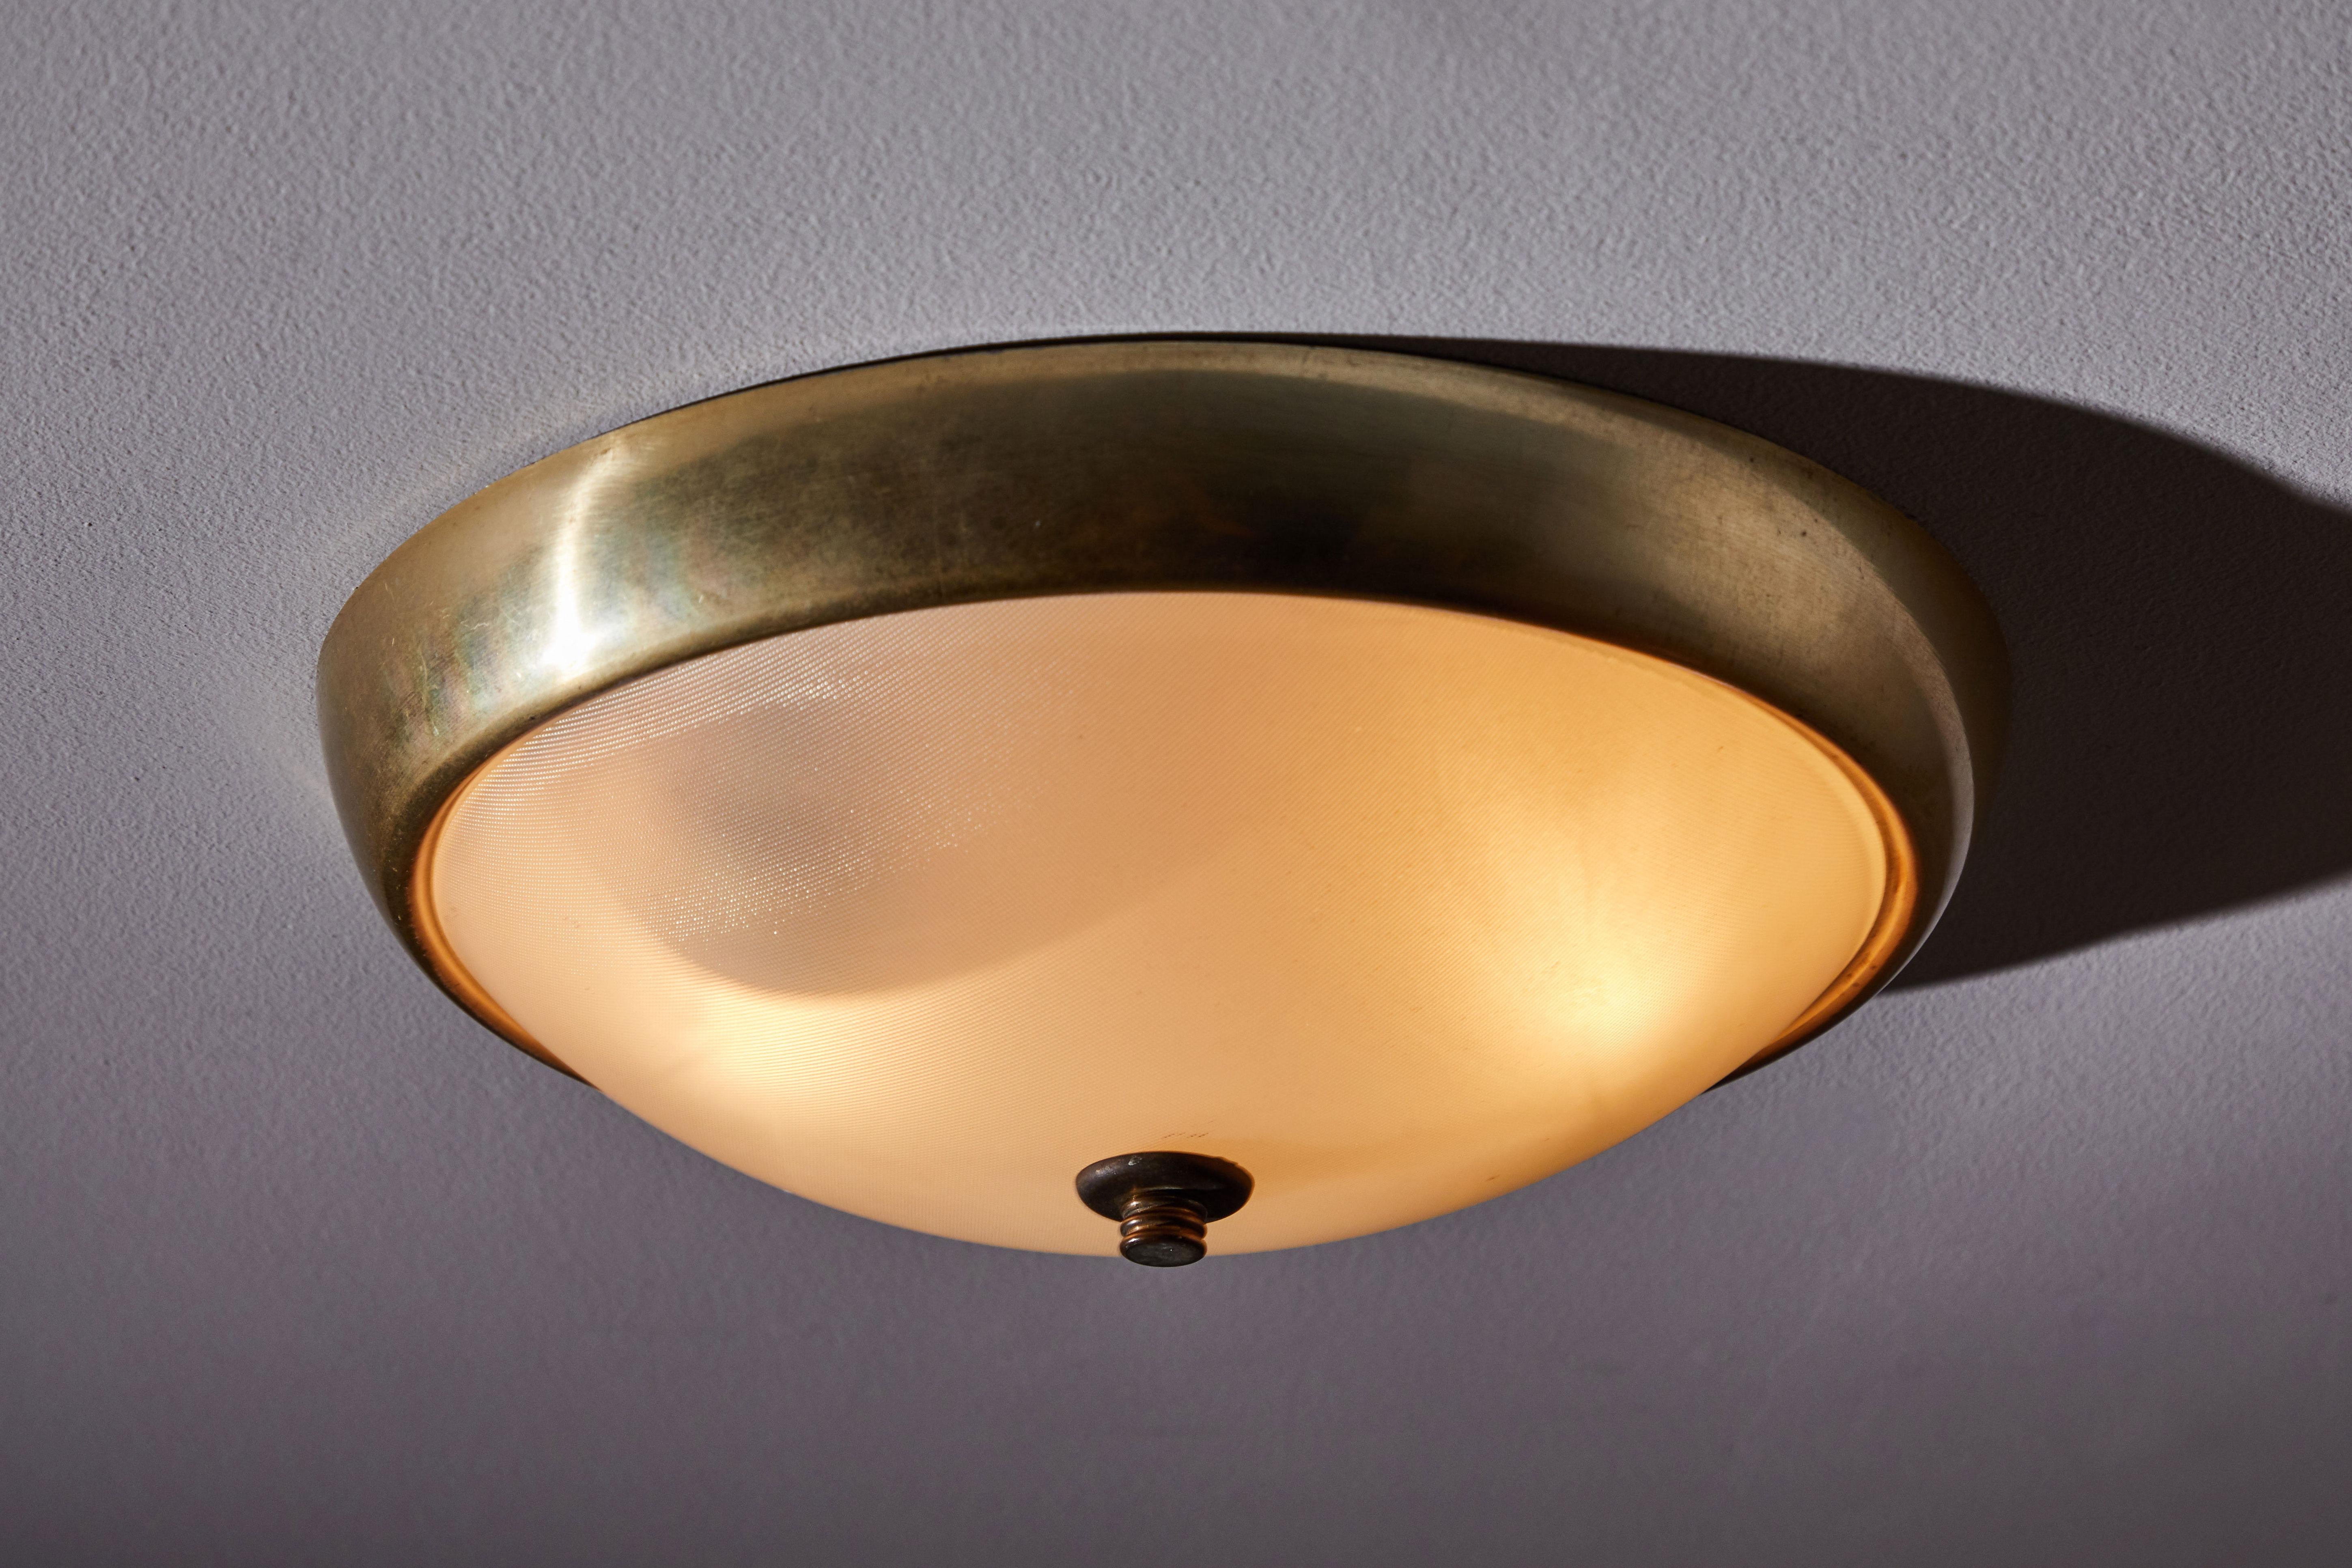 Six Italian ceiling lights. Manufactured in Italy circa 1950s. Brass and holophane glass. Rewired for US junction boxes. Each light takes two E27 60w maximum bulbs. Priced and sold individually.